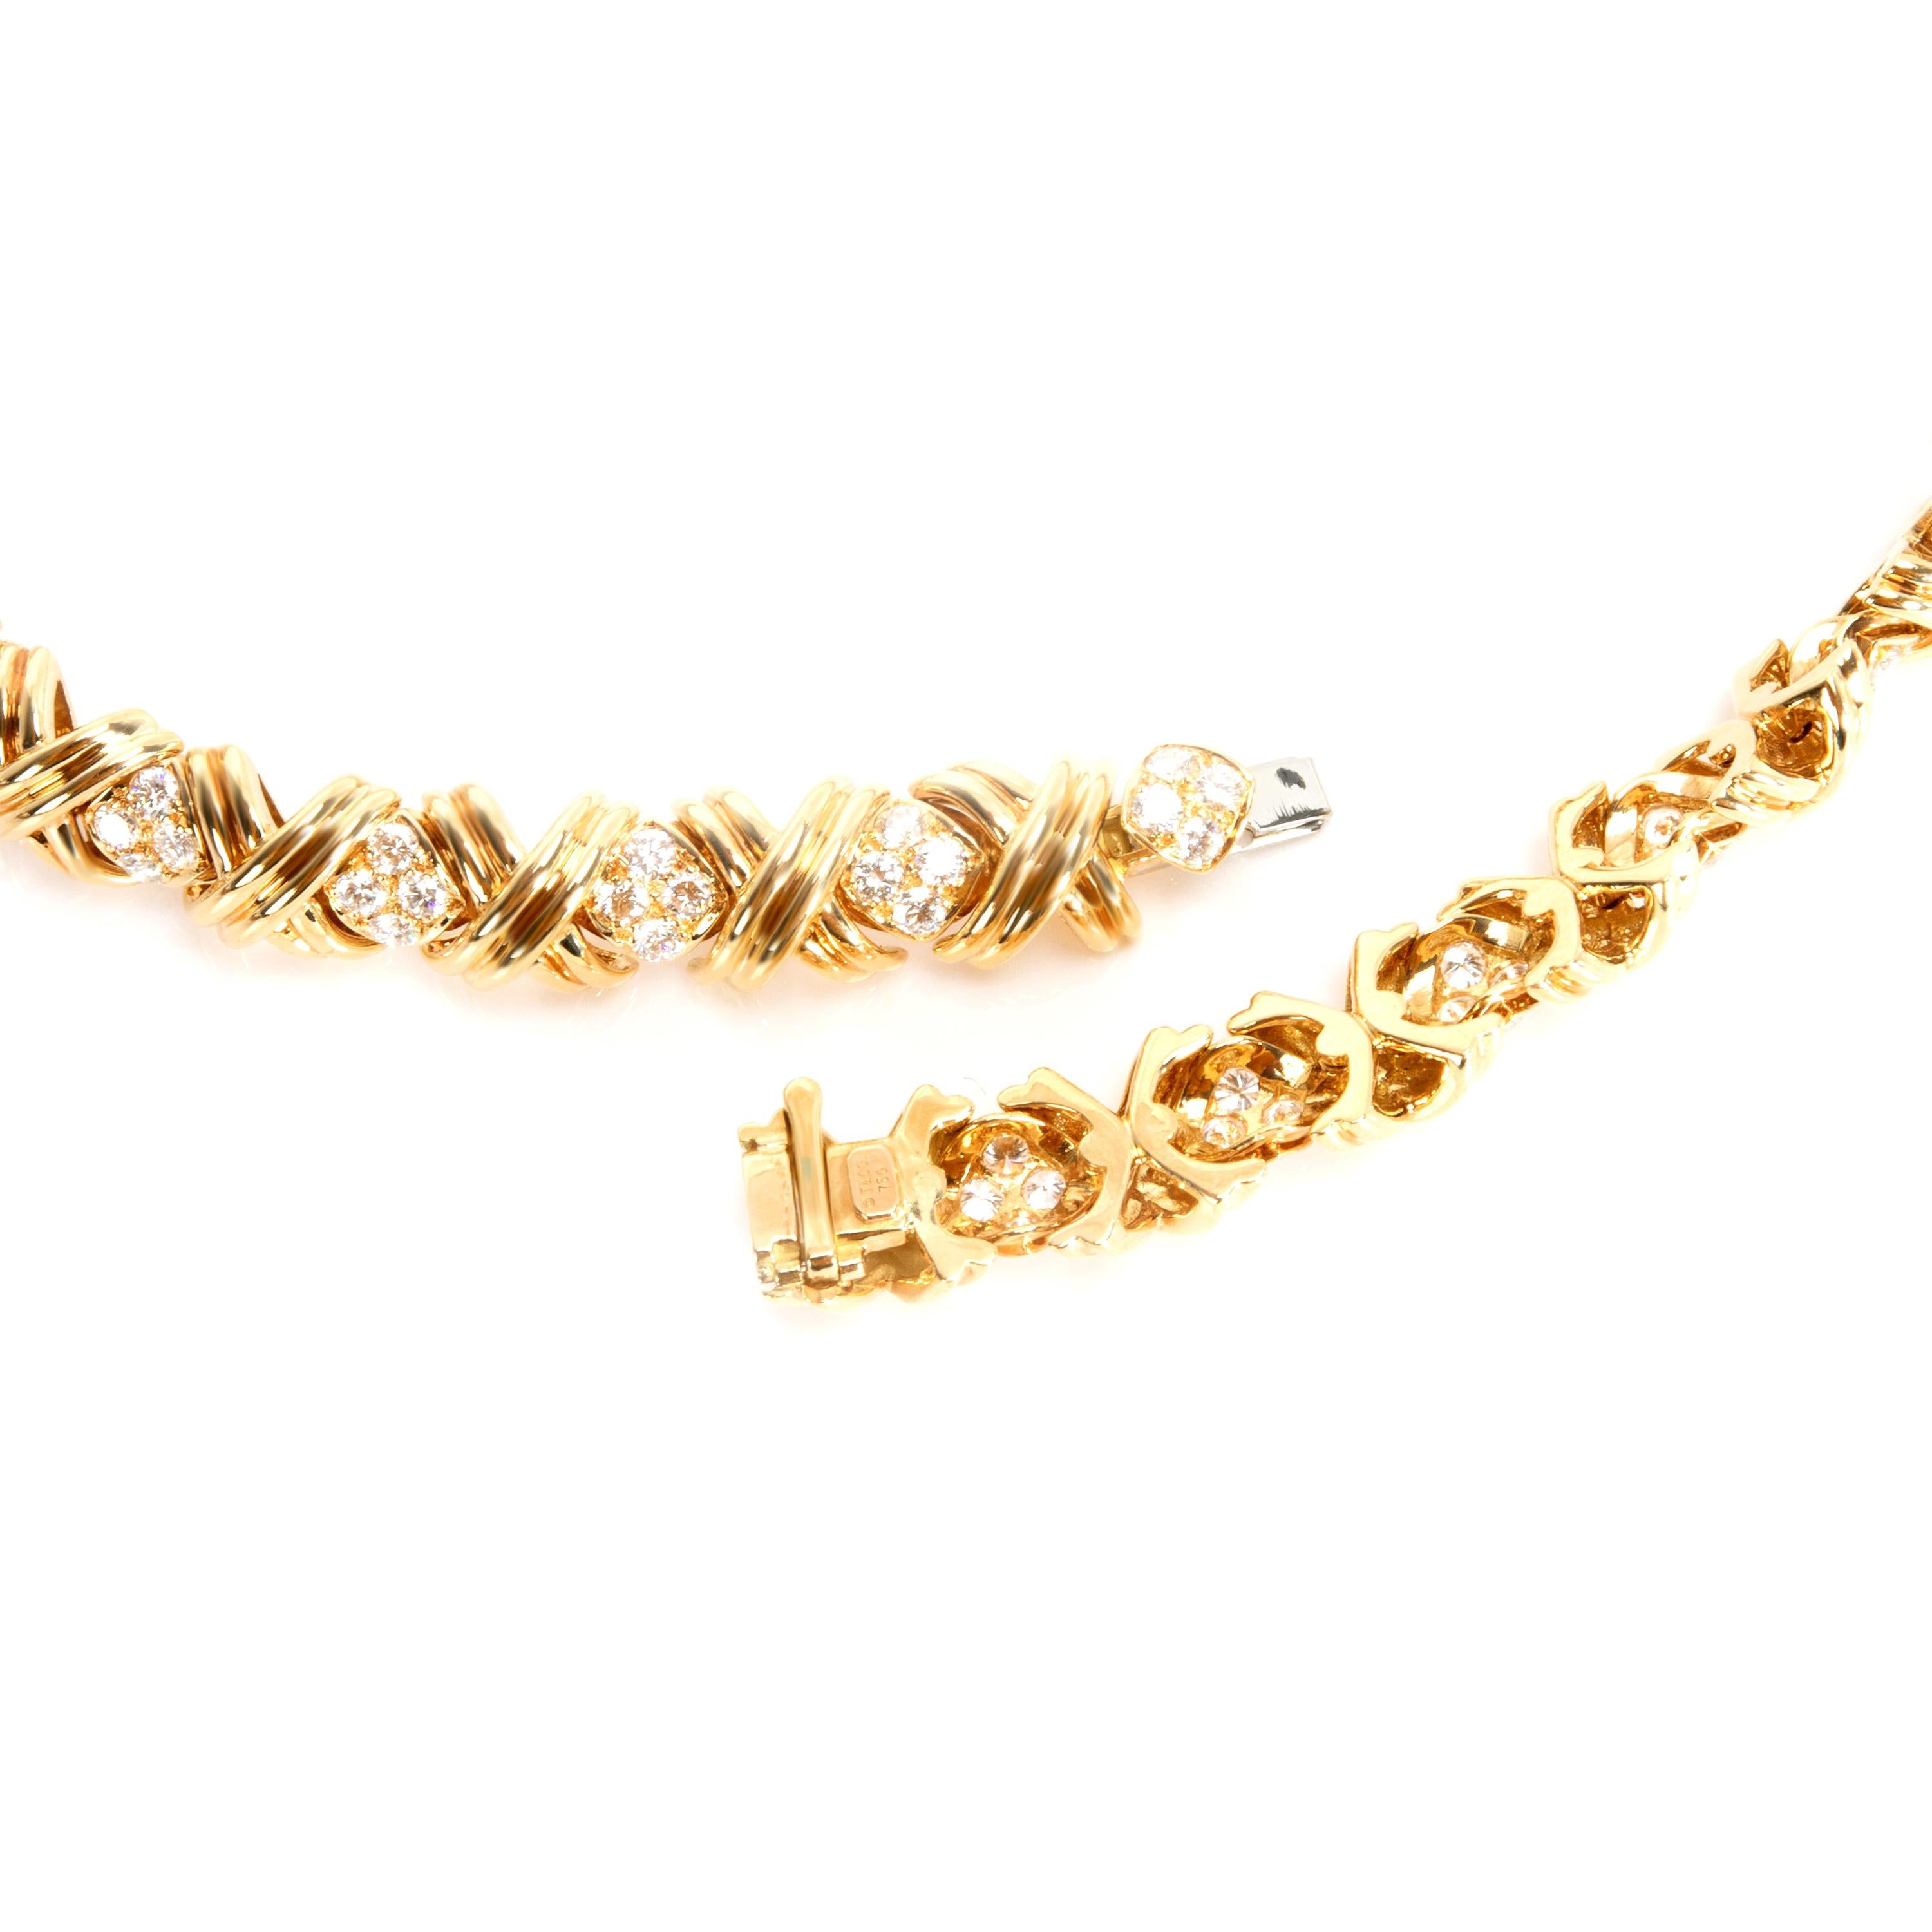 Modern Tiffany & Co. X-Collection Diamond Necklace in 18 Karat Yellow Gold 8.28 Carat